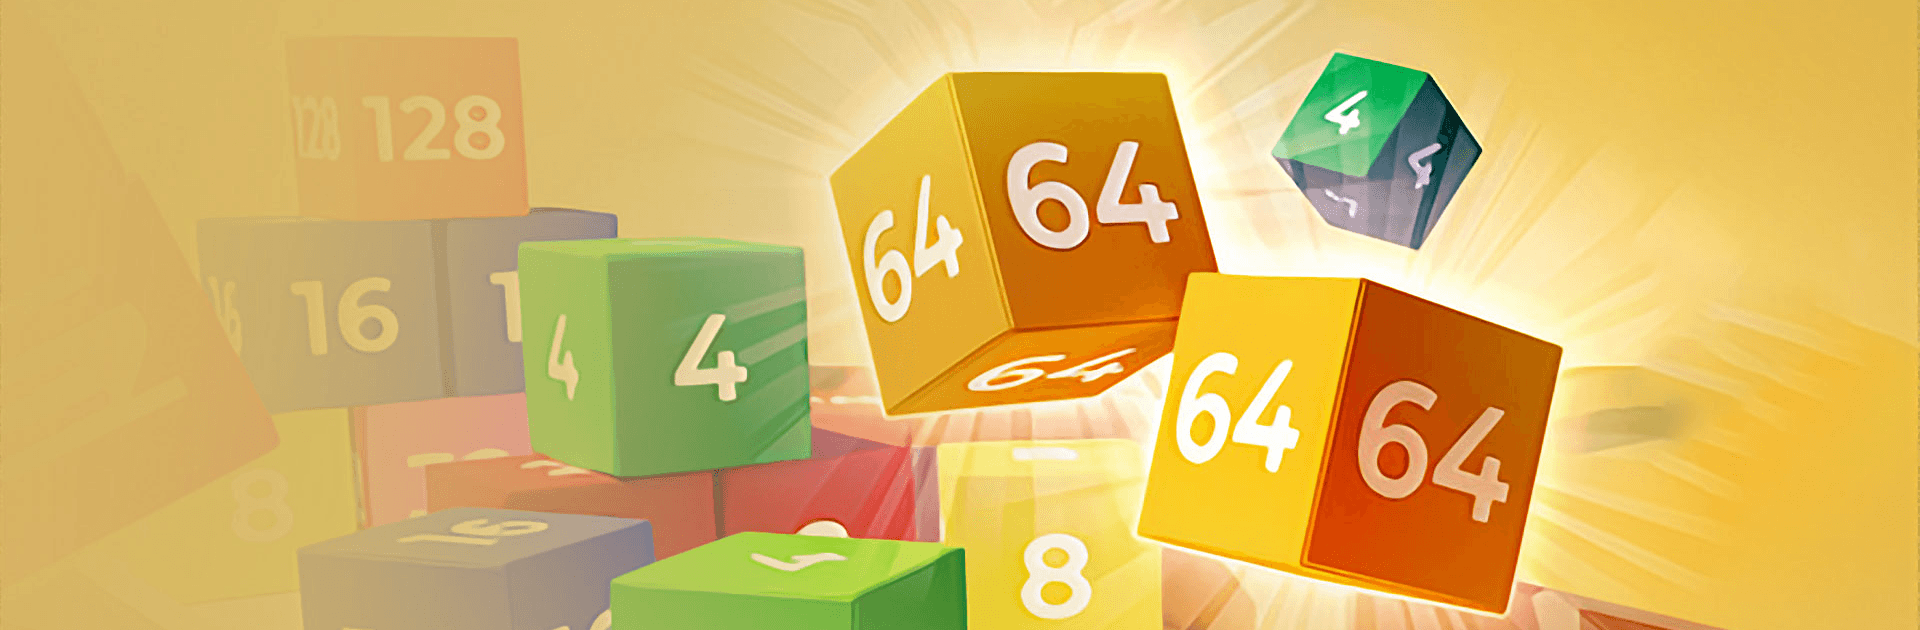 Cubes 2048 - Play Cubes 2048 On Papa's Games